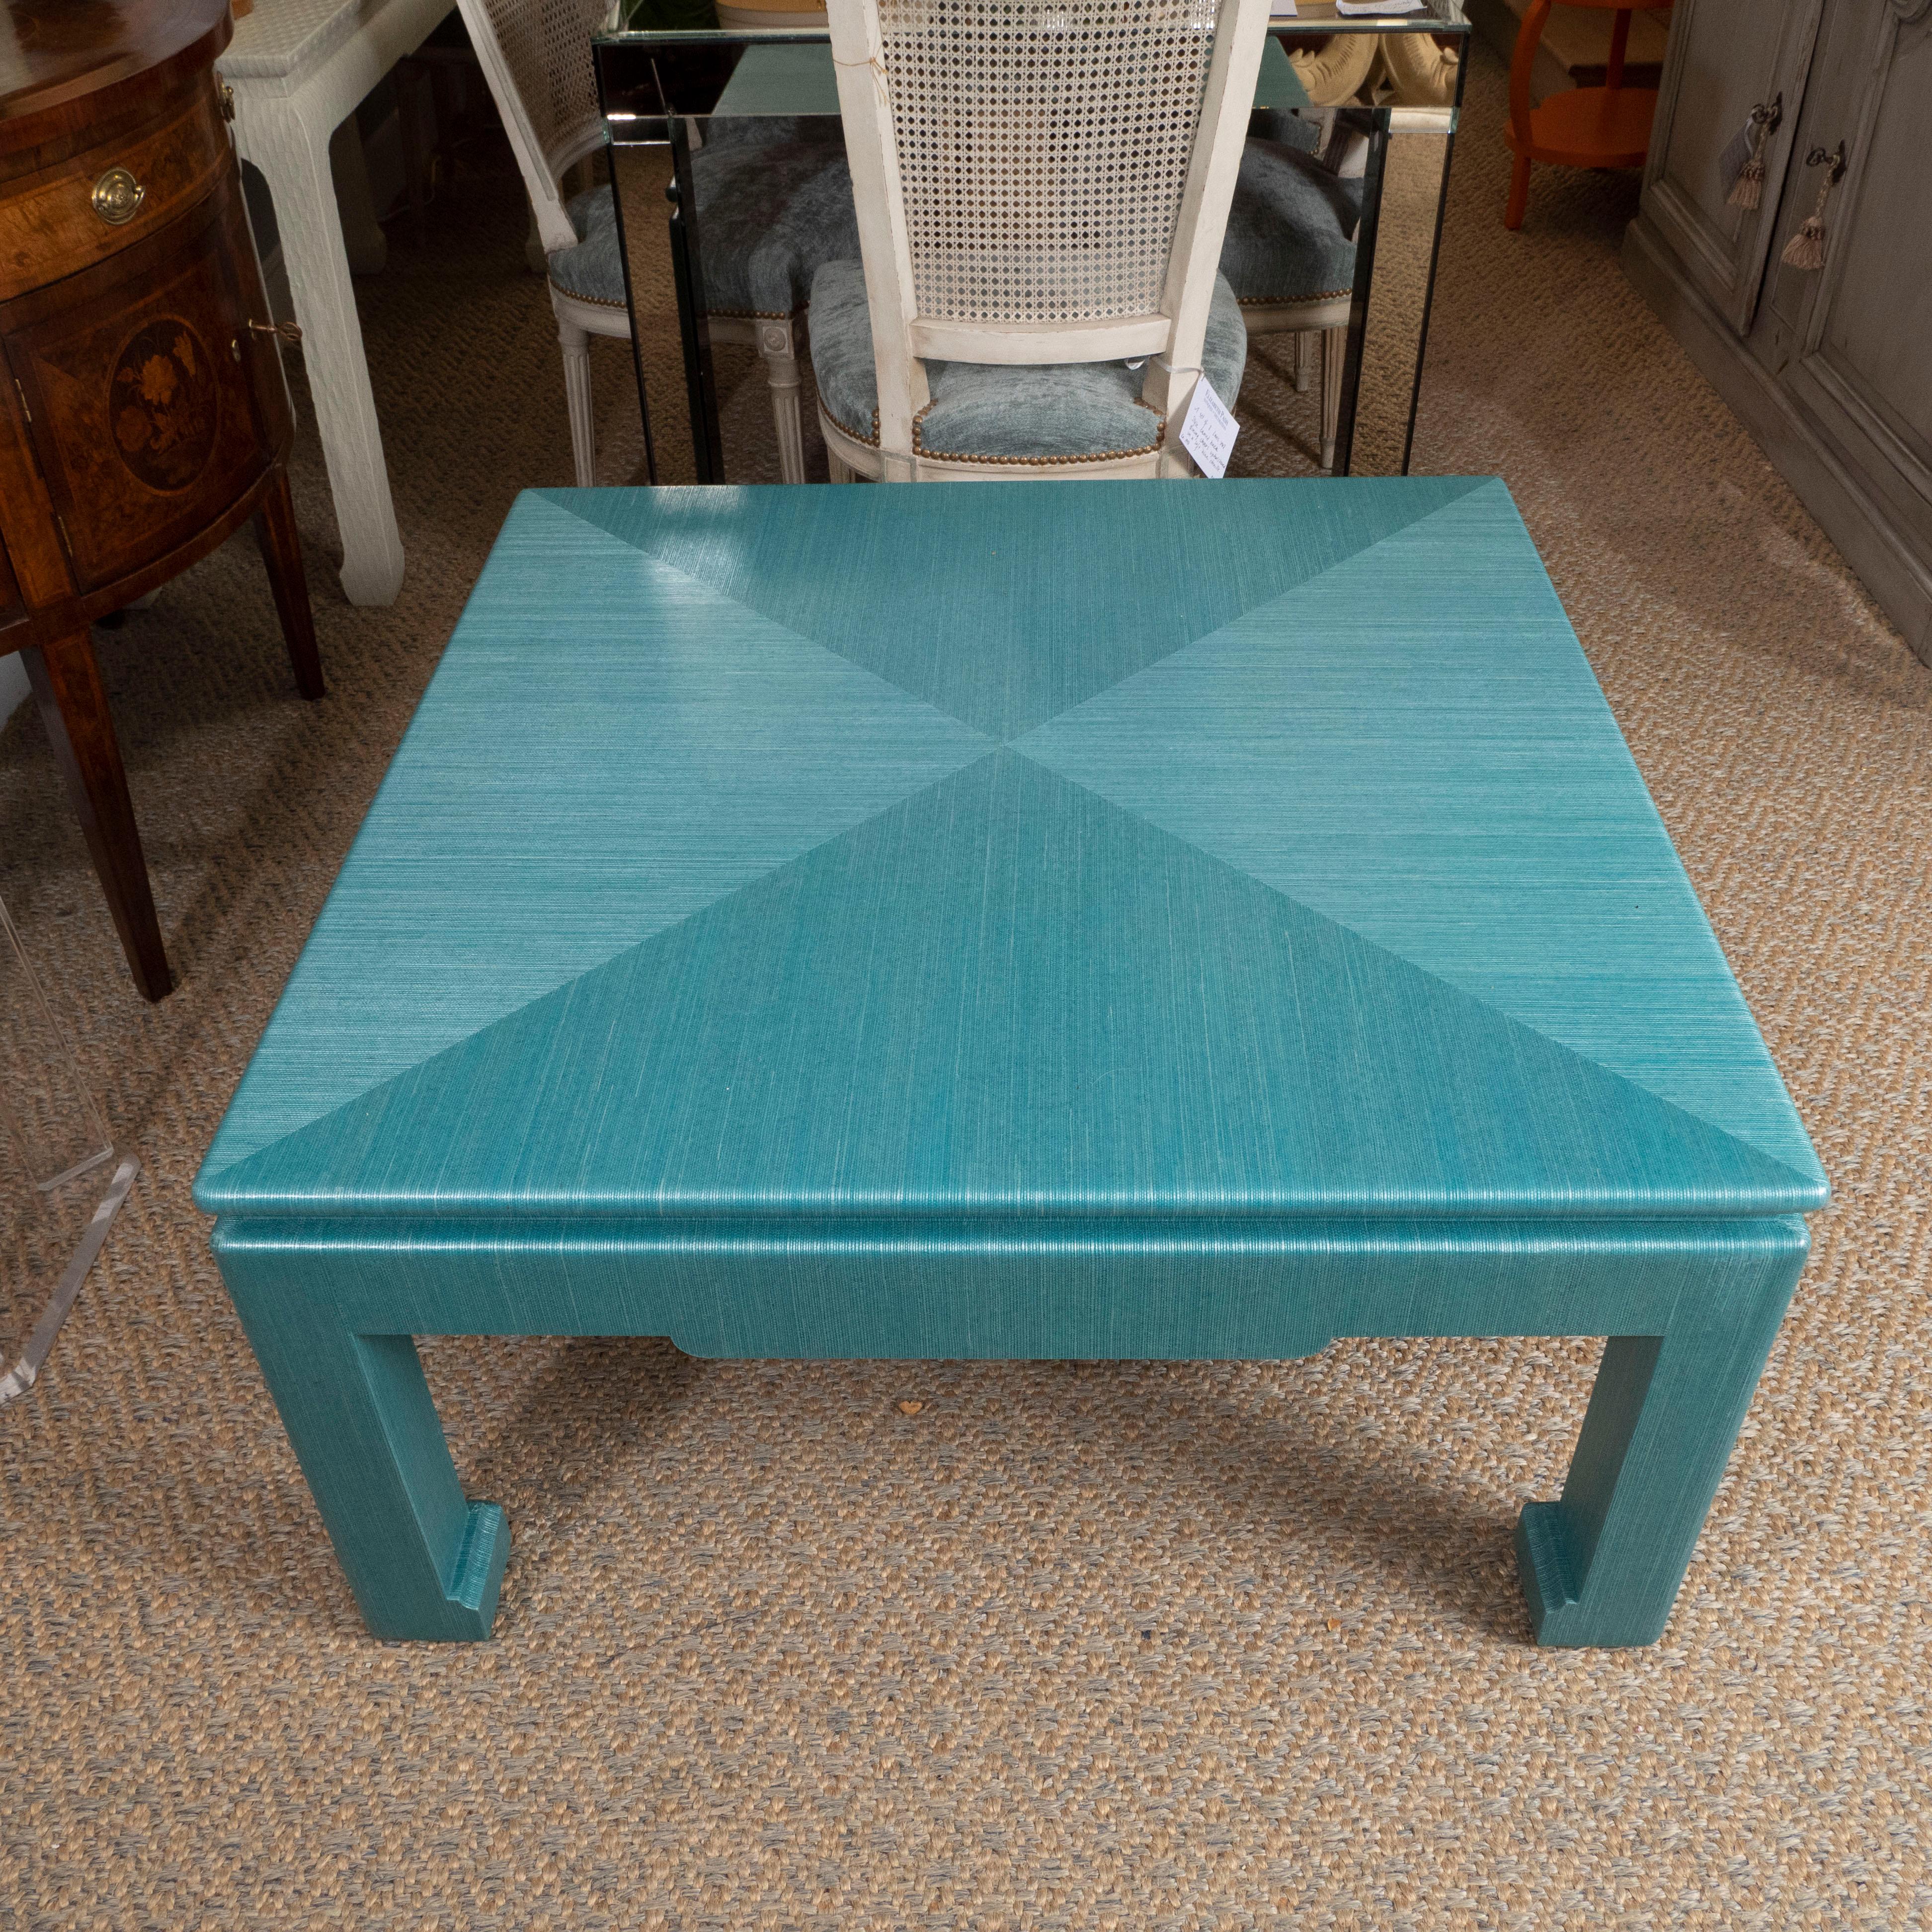 This table will add color and style to a space! In the Asian style, this piece has been beautifully wrapped in a turquoise grasscloth. Perfect for a living or family room, this piece has form and function!